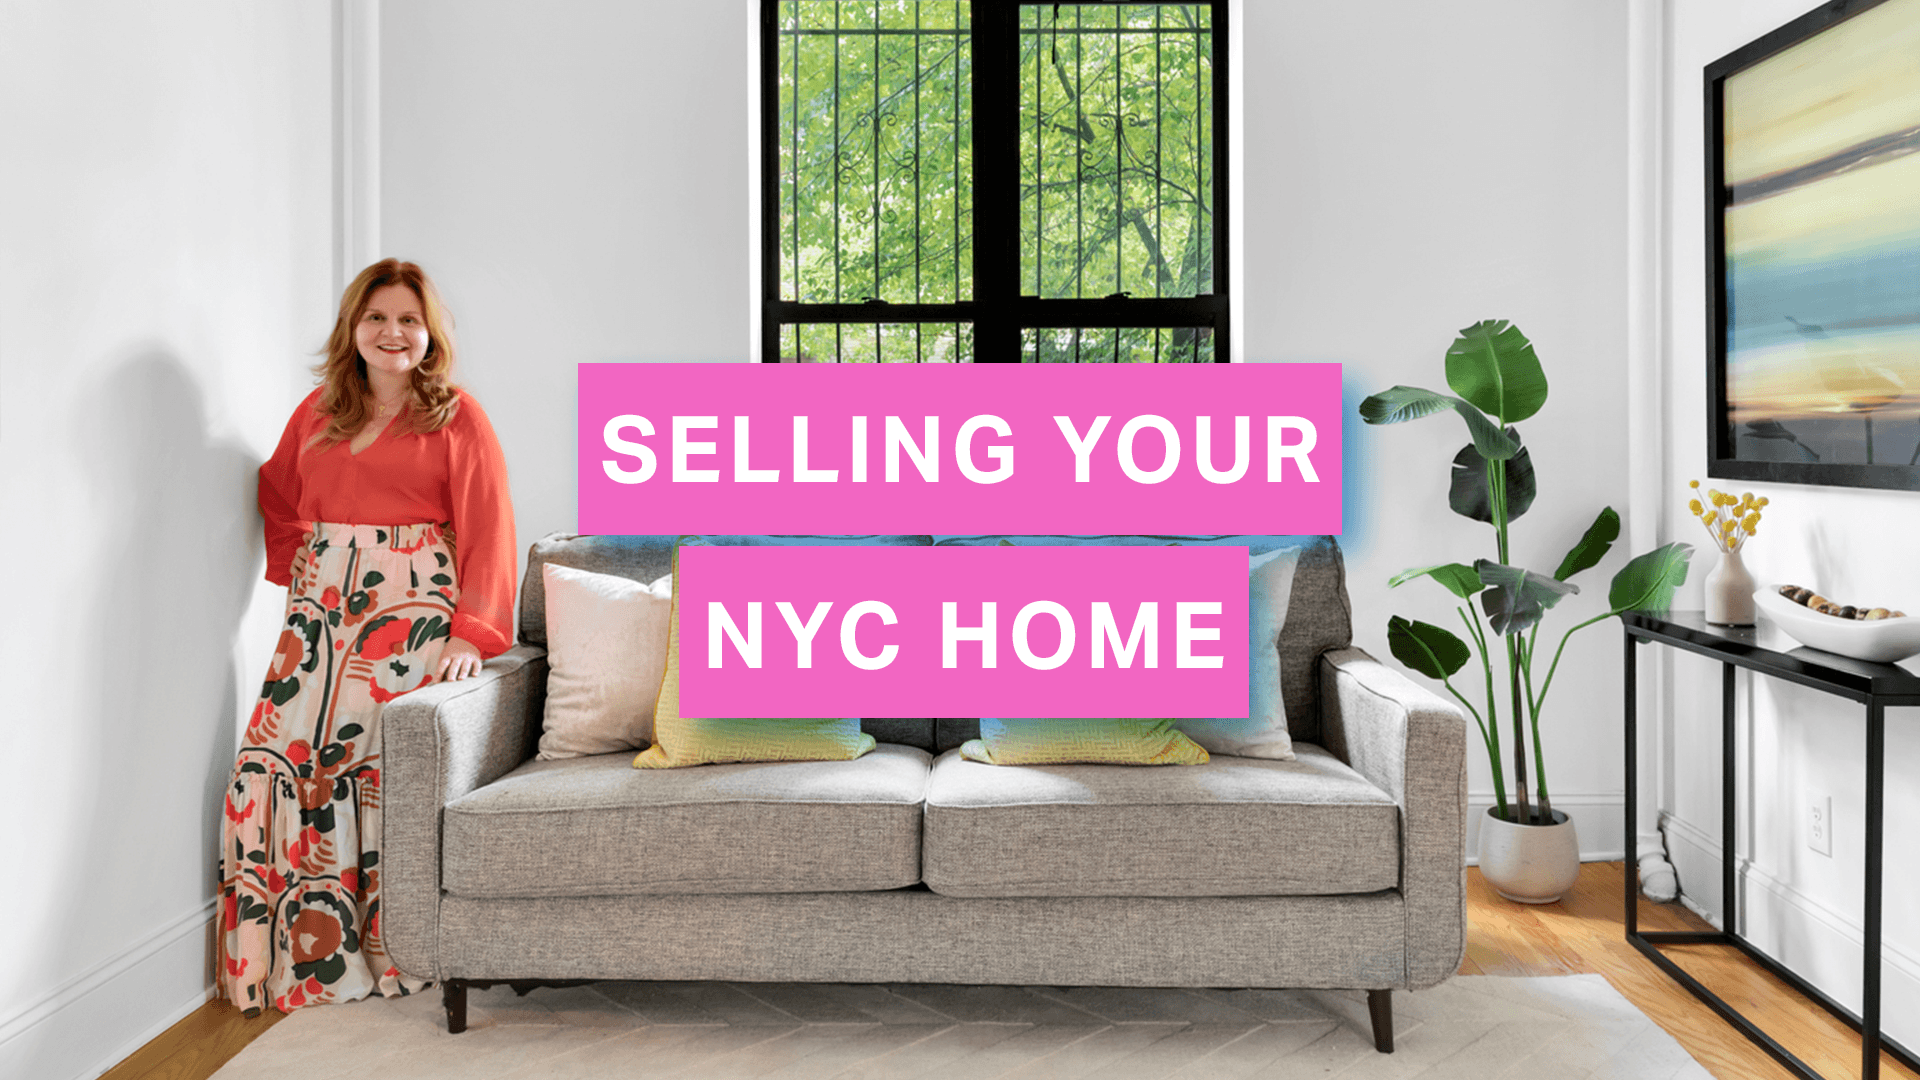 A Change of A Dress - An Introduction To Selling Your Home in NYC